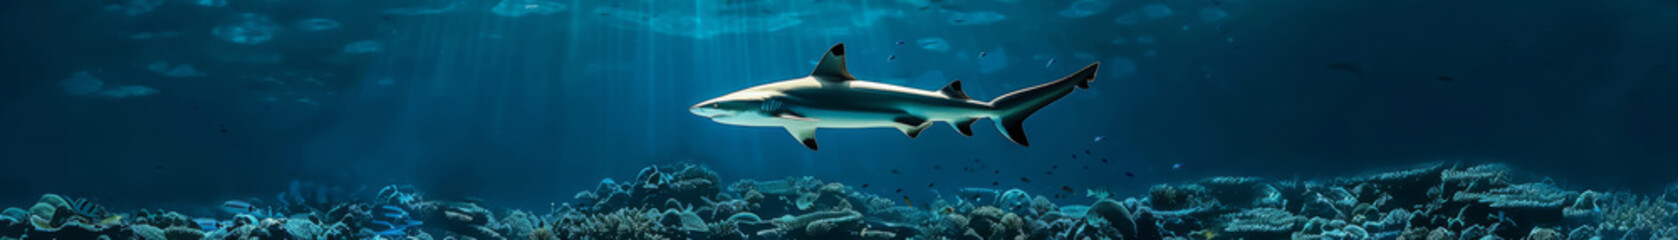 Lone Reef Shark Near a Coral Bed with Sunlight Filtering Through